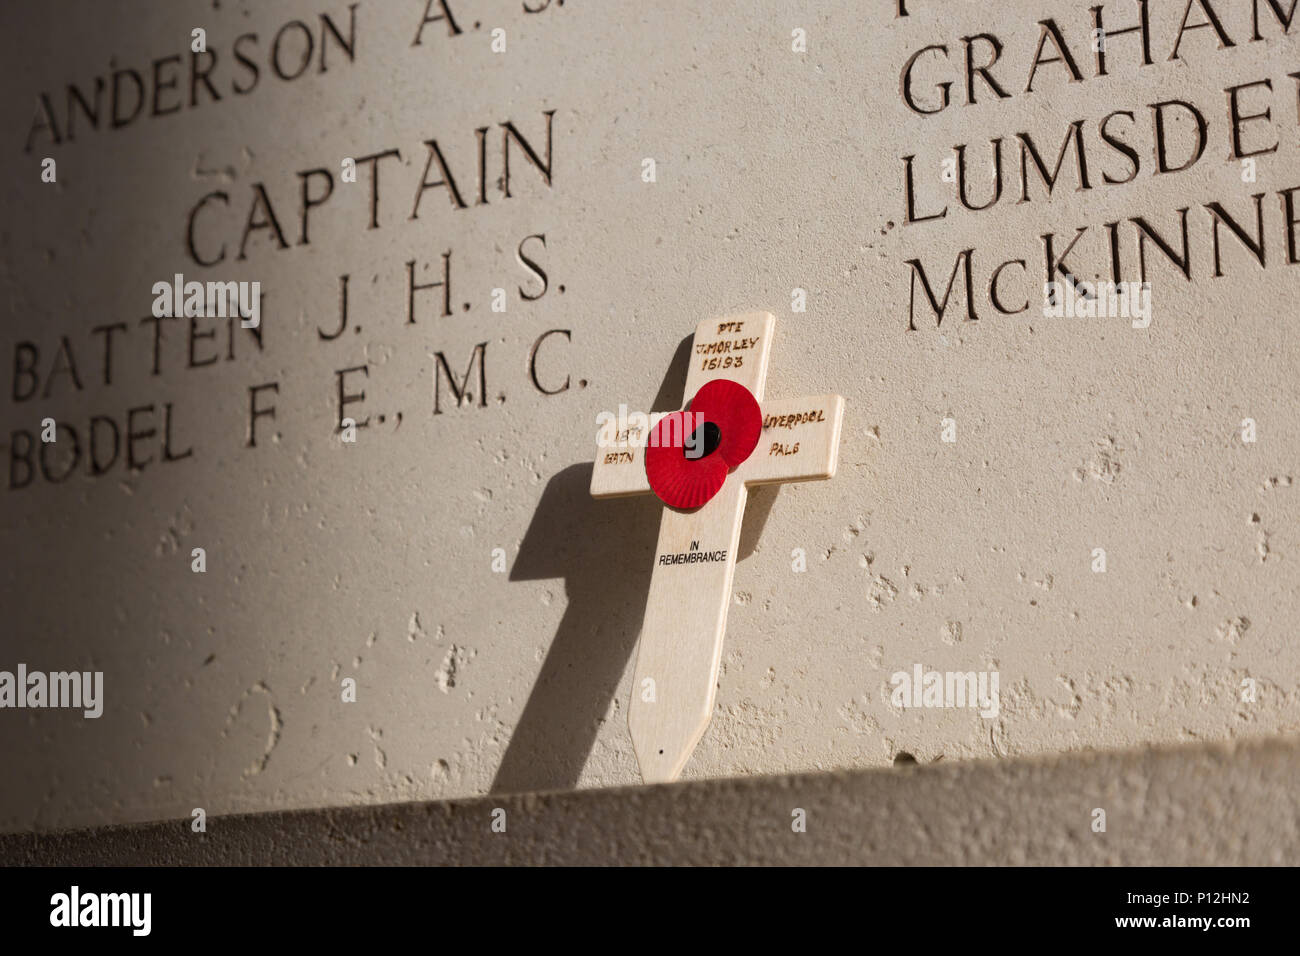 Names of war dead on the walls of the Menin Gate memorial, Ypres, Belgium Stock Photo